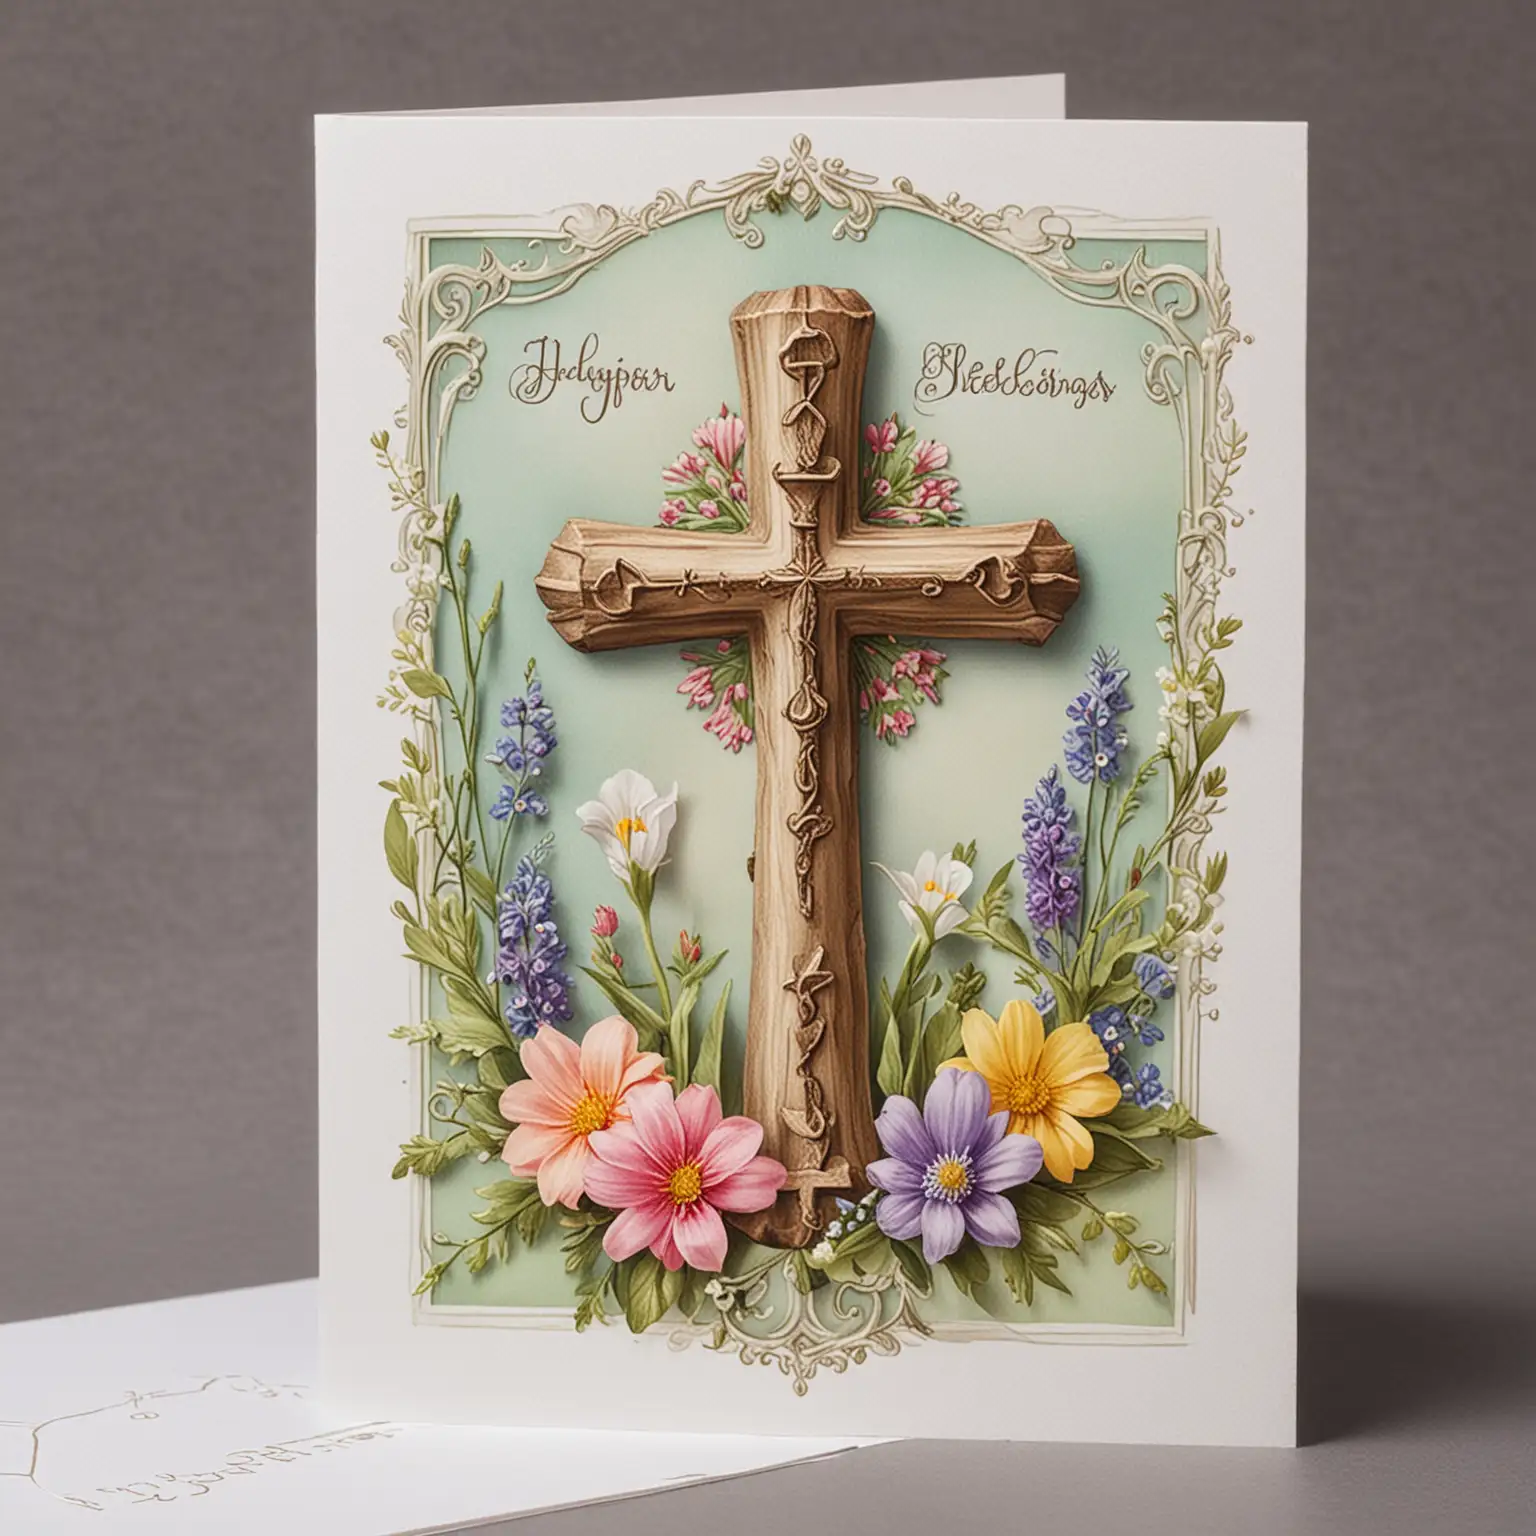 Easter Card with flowers, cross and a small chalice.  Wording on top of card Easter Blessings.